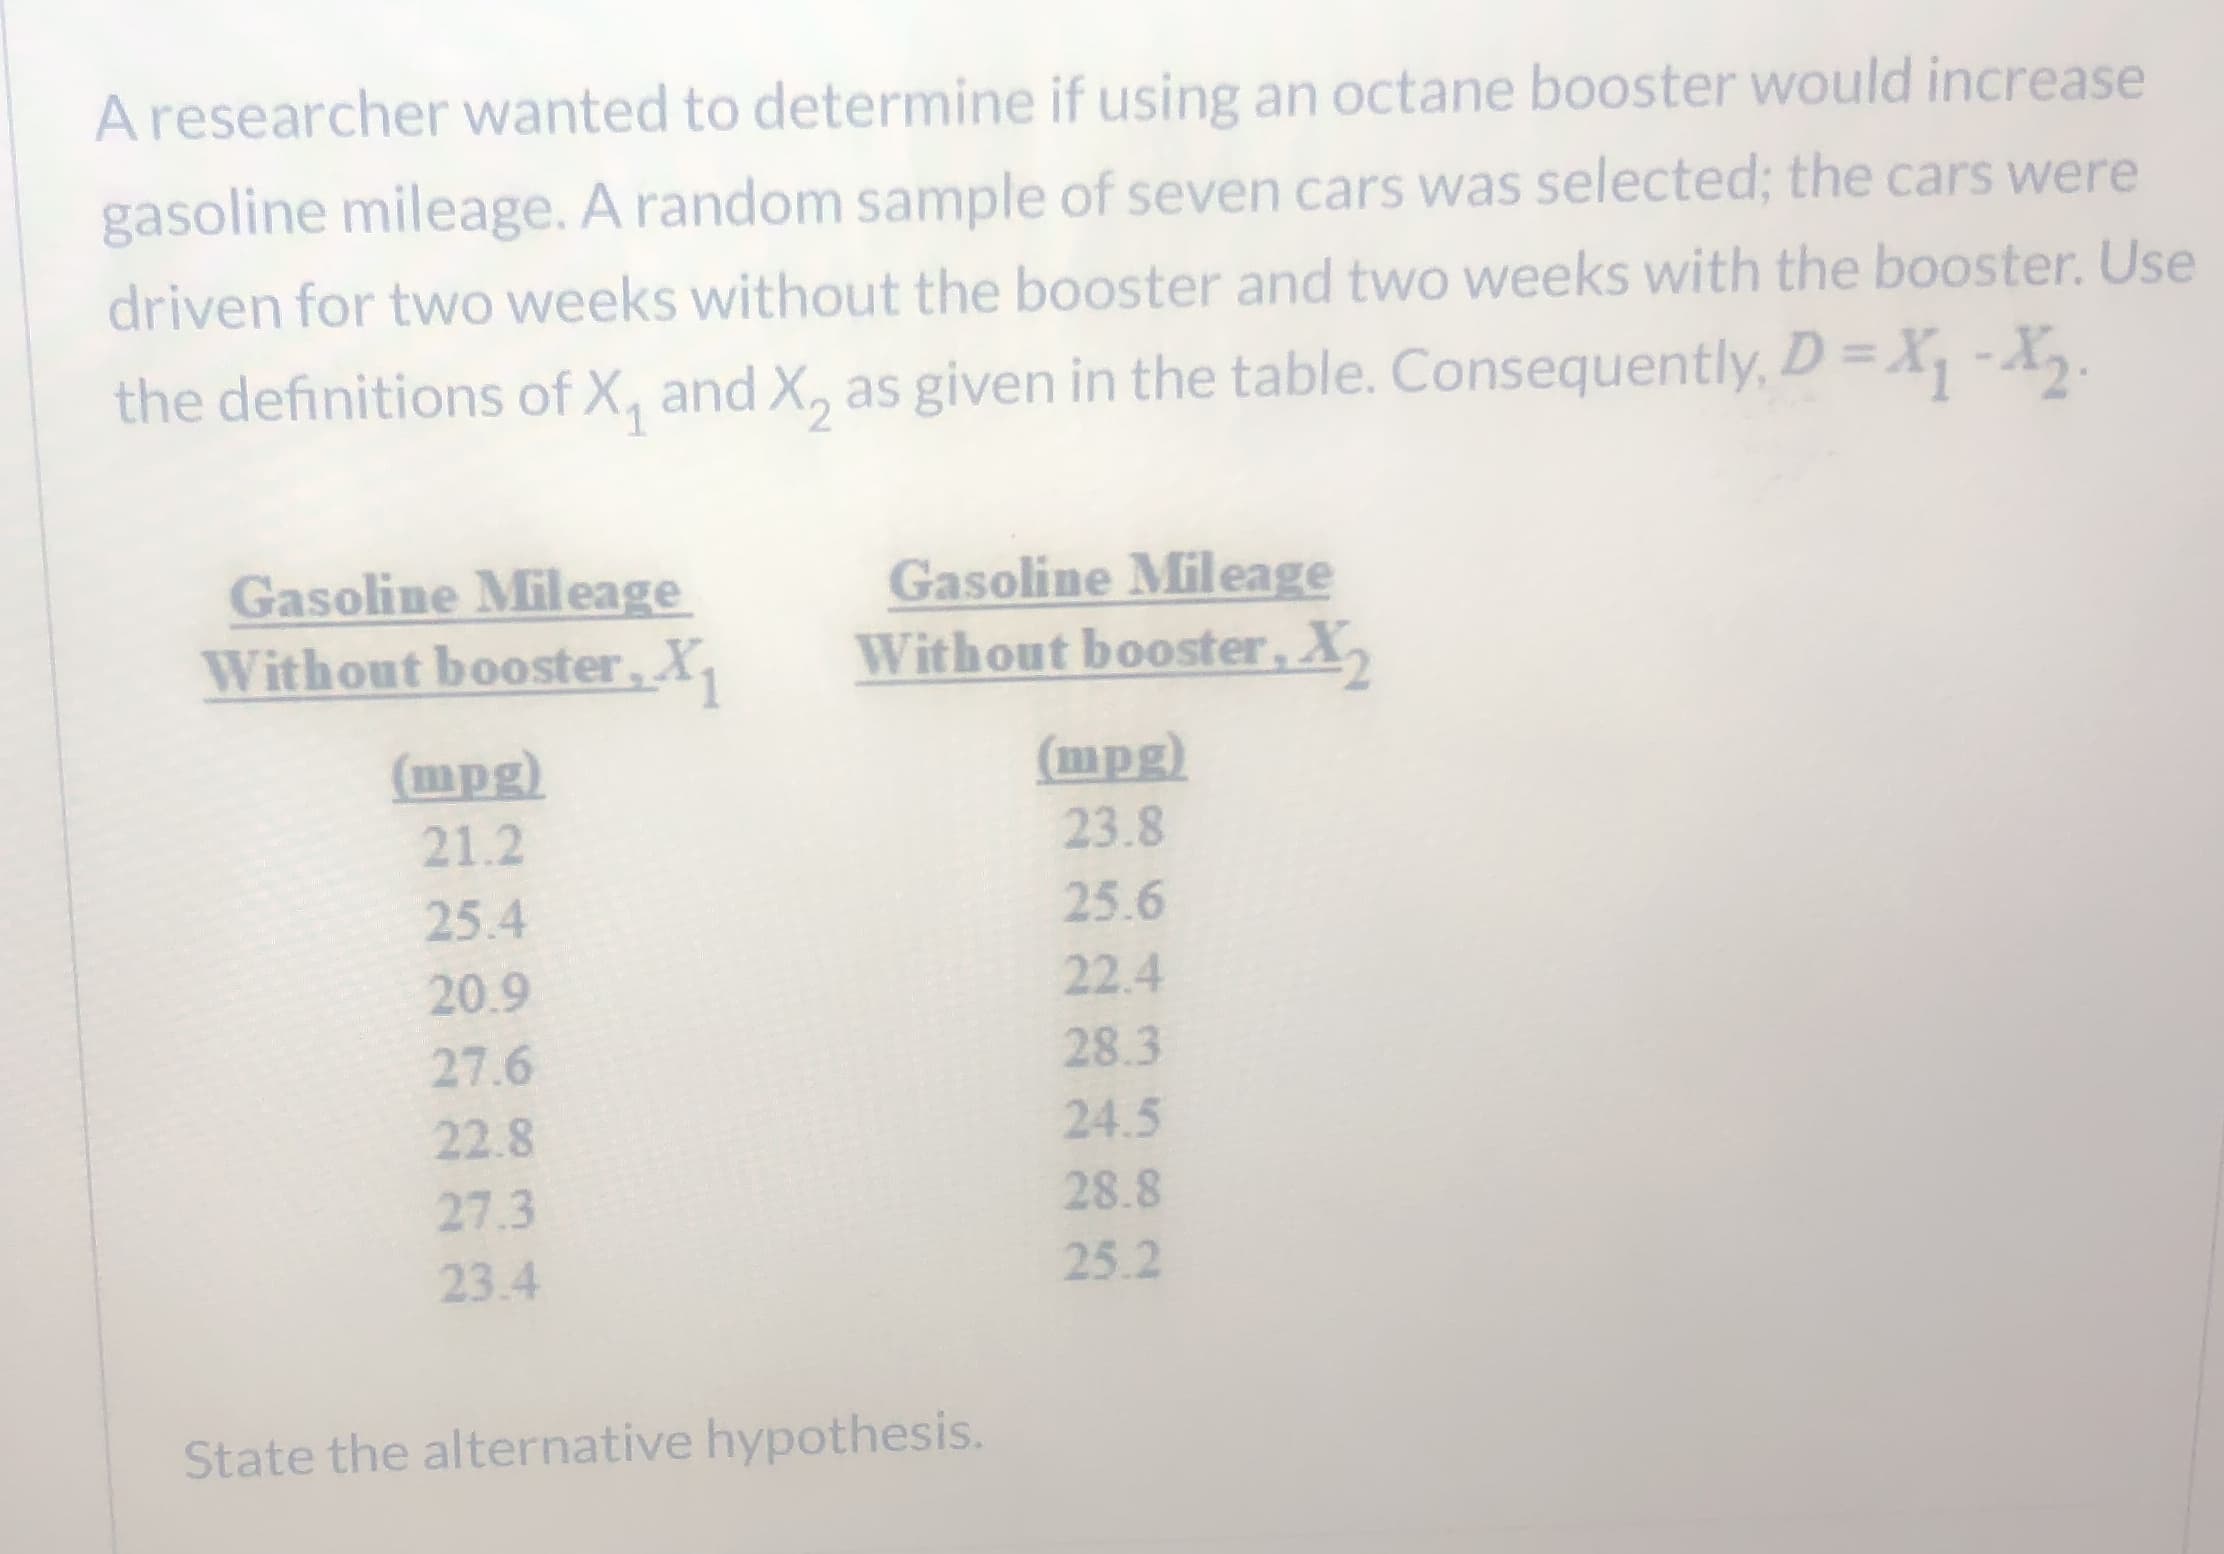 A researcher wanted to determine if using an octane booster would increase
gasoline mileage. A random sample of seven cars was selected; the cars were
driven for two weeks without the booster and two weeks with the booster. Use
the definitions of X, and X, as given in the table. Consequently, D= X, -X,.
1
Gasoline Mileage
Without booster, X,
Gasoline Mileage
Without booster,X,
(mpg)
(mpg)
21.2
23.8
25.4
25.6
20.9
22.4
28.3
27.6
22.8
24.5
28.8
27.3
25.2
23.4
State the alternative hypothesis.
